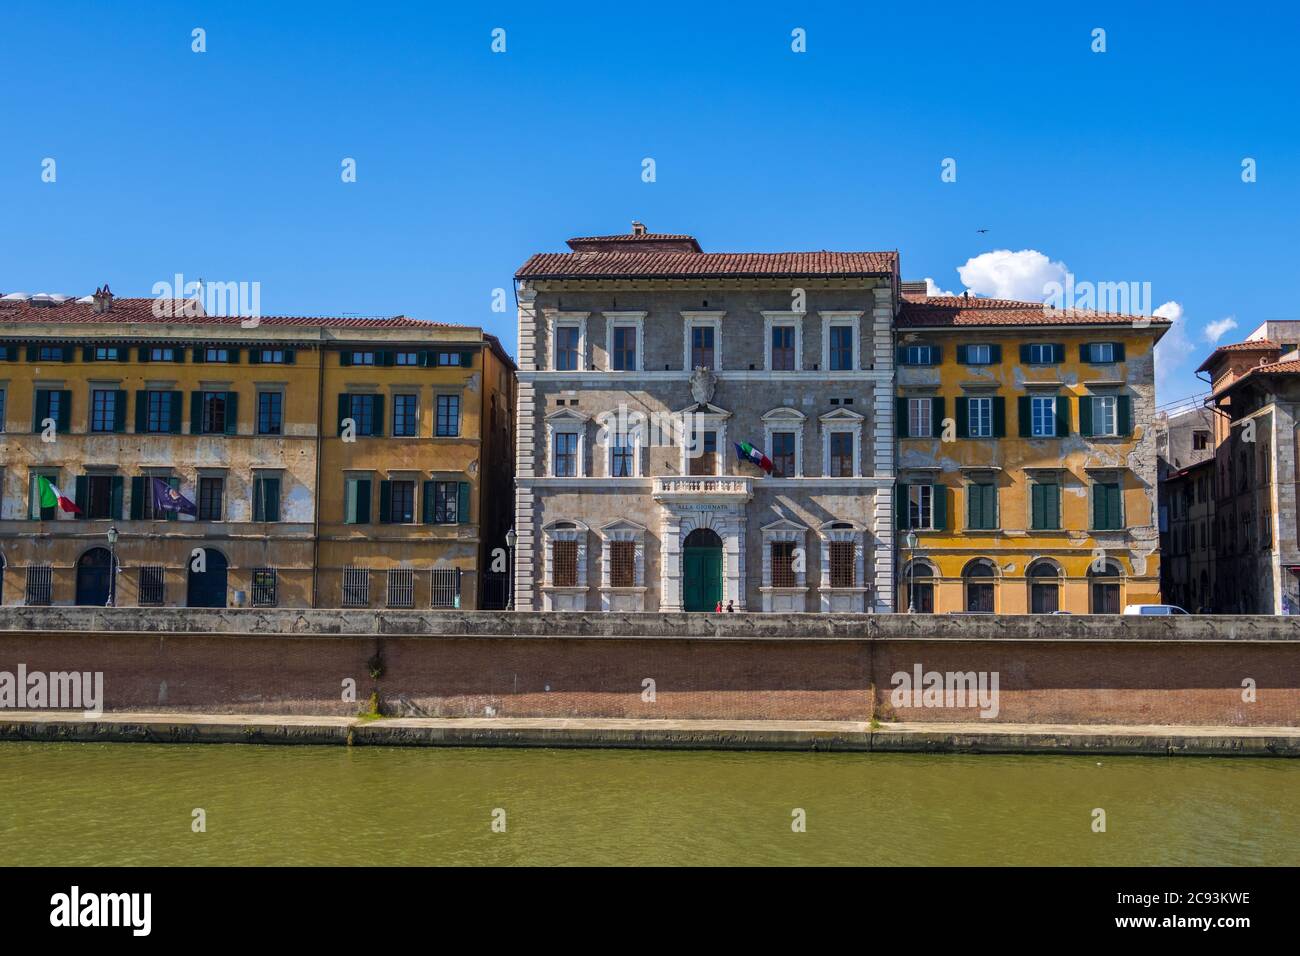 Pisa, Italy - August 14, 2019: The Palazzo Lanfreducci, also called the Palazzo Upezzinghi or Palazzo Alla Giornata on the bank of Arno river in Pisa Stock Photo